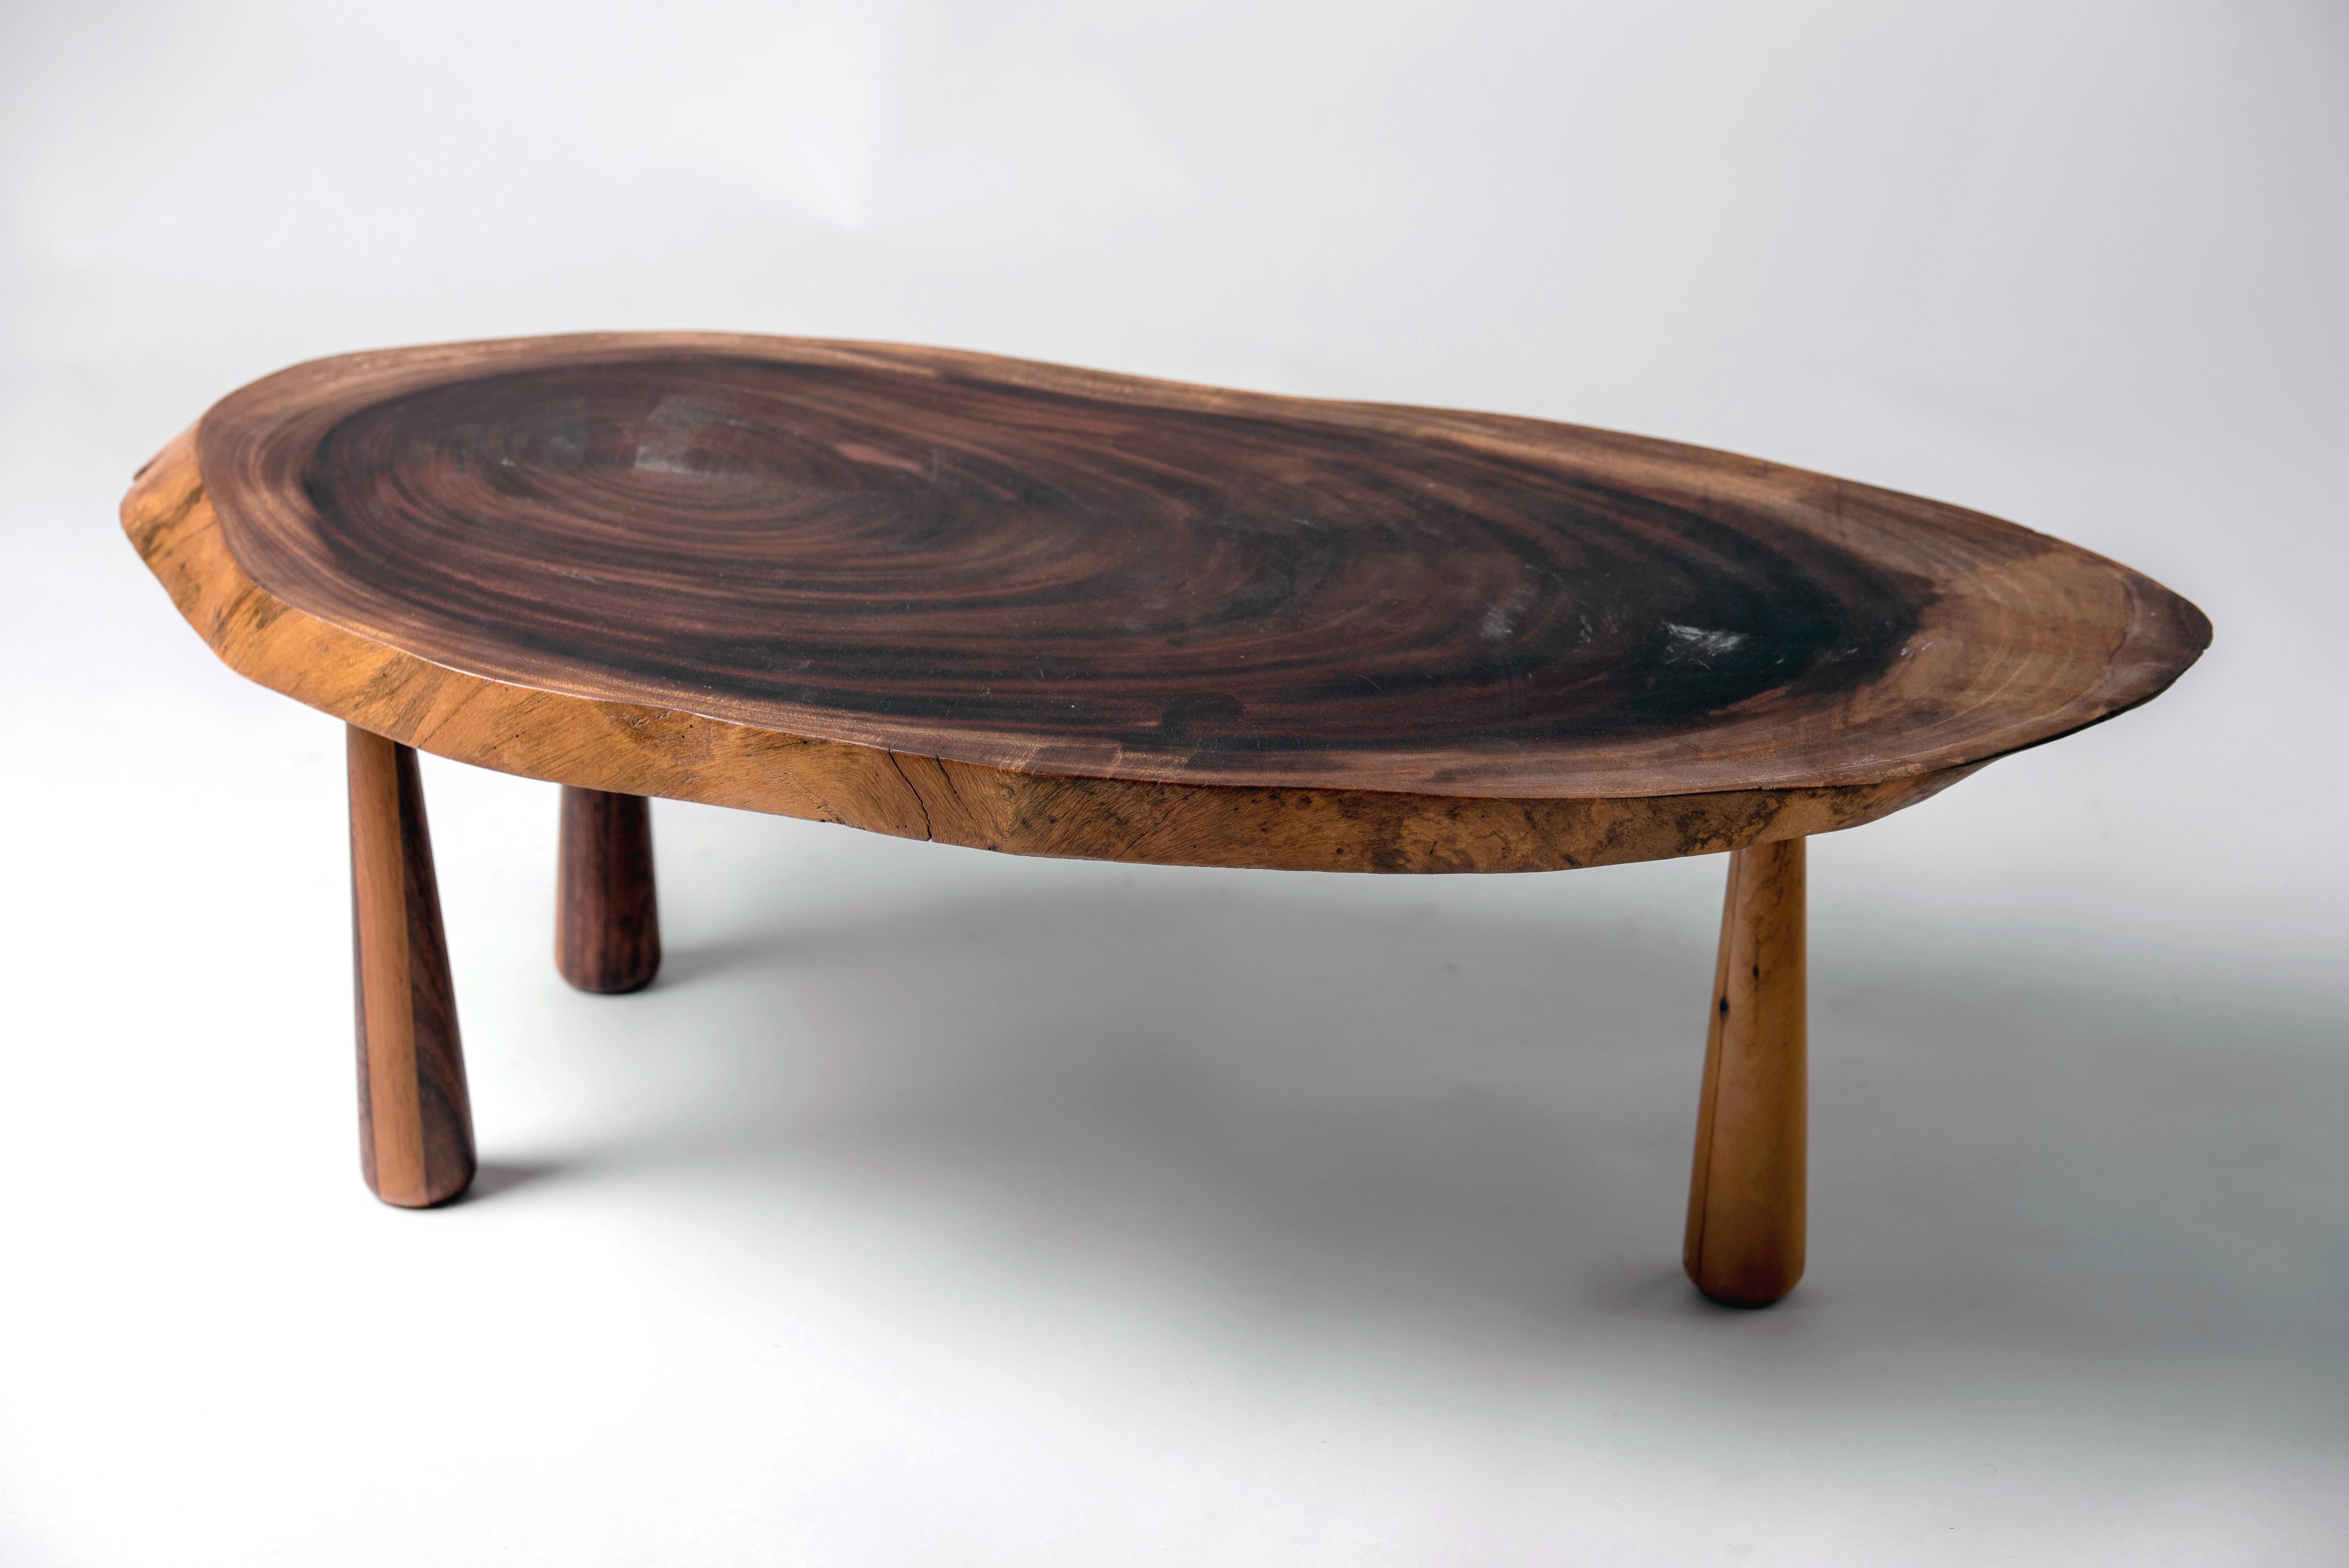 Interesting coffee table. A top made from a slice of a tree rests on three conical legs made of two woods, light and dark.